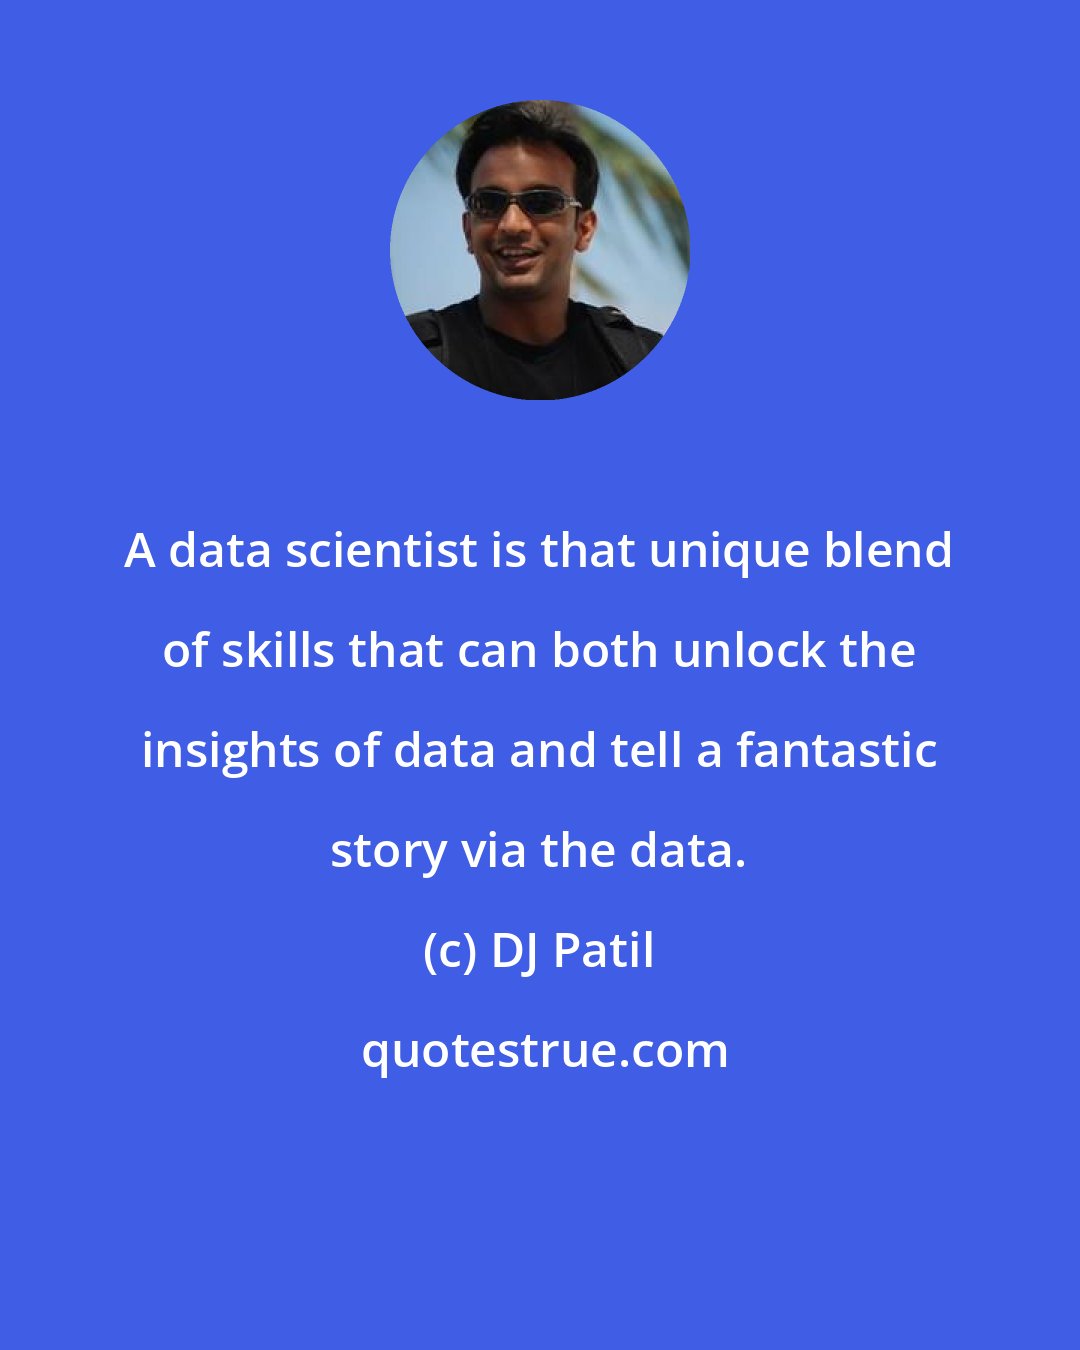 DJ Patil: A data scientist is that unique blend of skills that can both unlock the insights of data and tell a fantastic story via the data.